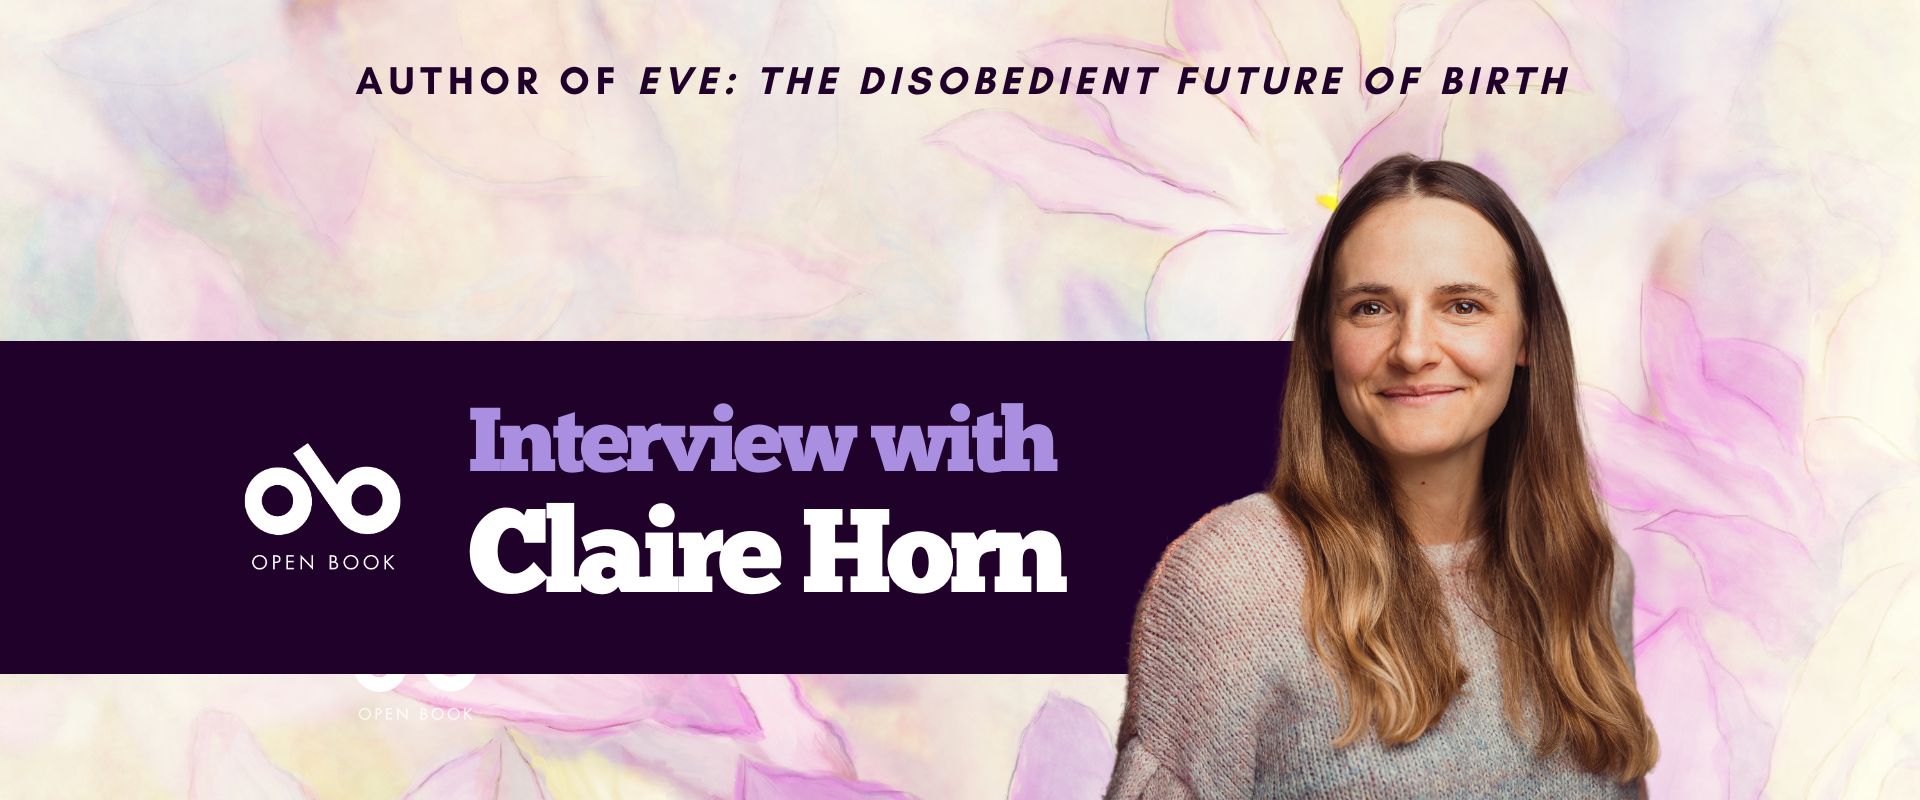 banner image with floral background and a photo of author Claire Horn. Top text reads Author of Eve: The Disobedient Future of Birth. Lower text reads Interview with Claire Horn. Open Book logo on the left.